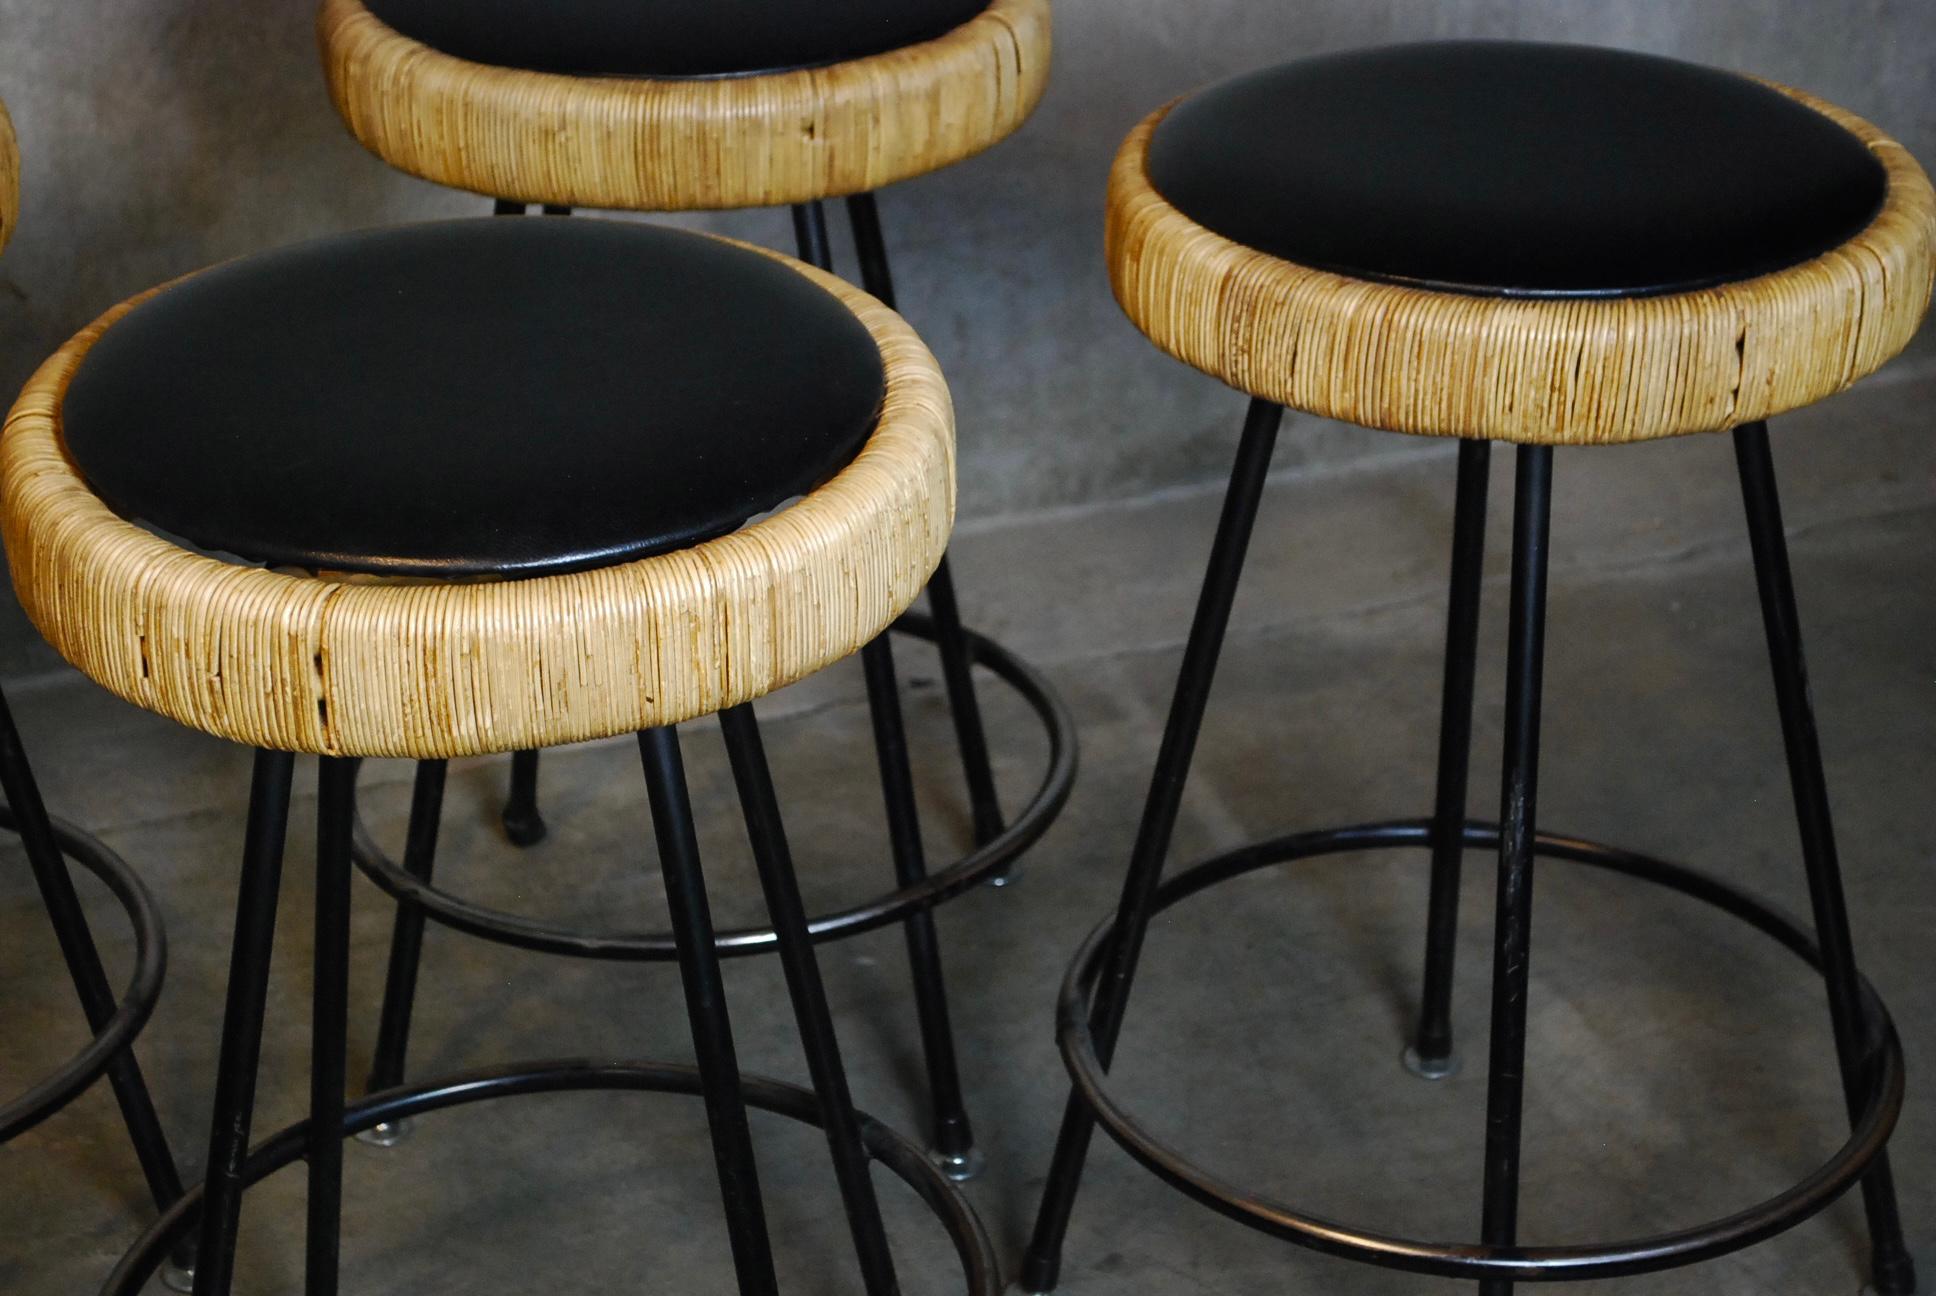 Set of four authentic stools showing use and wear hopwerver remain solid with minor usage in rattan. Tags are under seat.

Founded over a half century ago, Fong Brothers Company is a third generation family-run business focused on hand-made